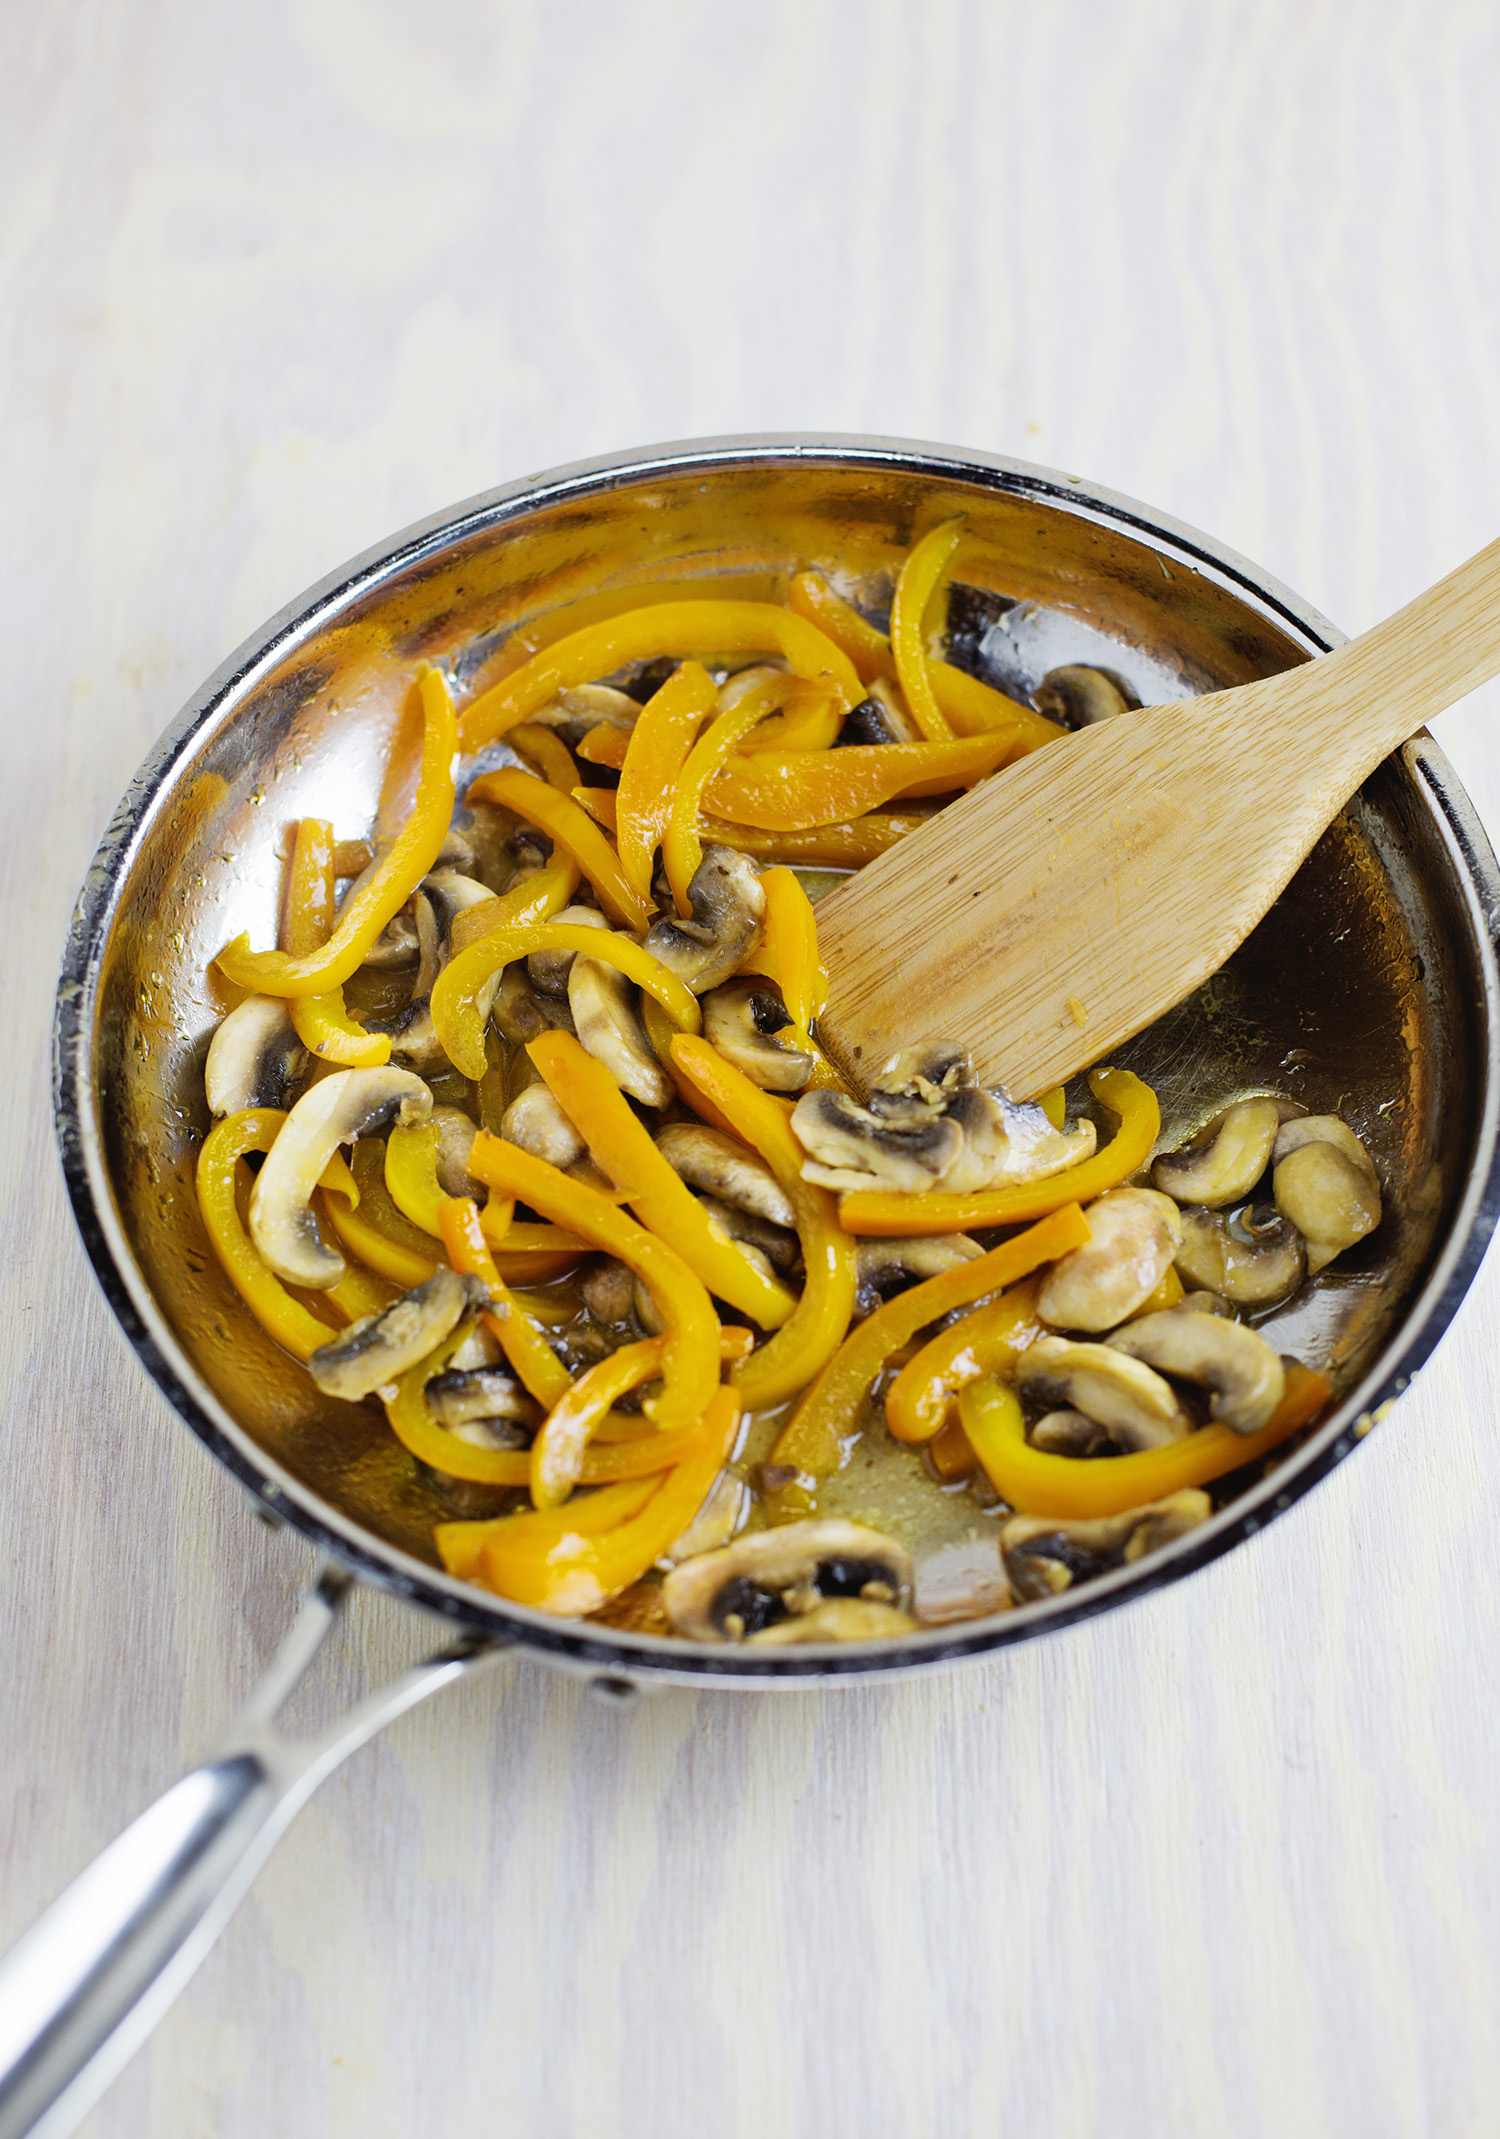 Peppers and mushrooms